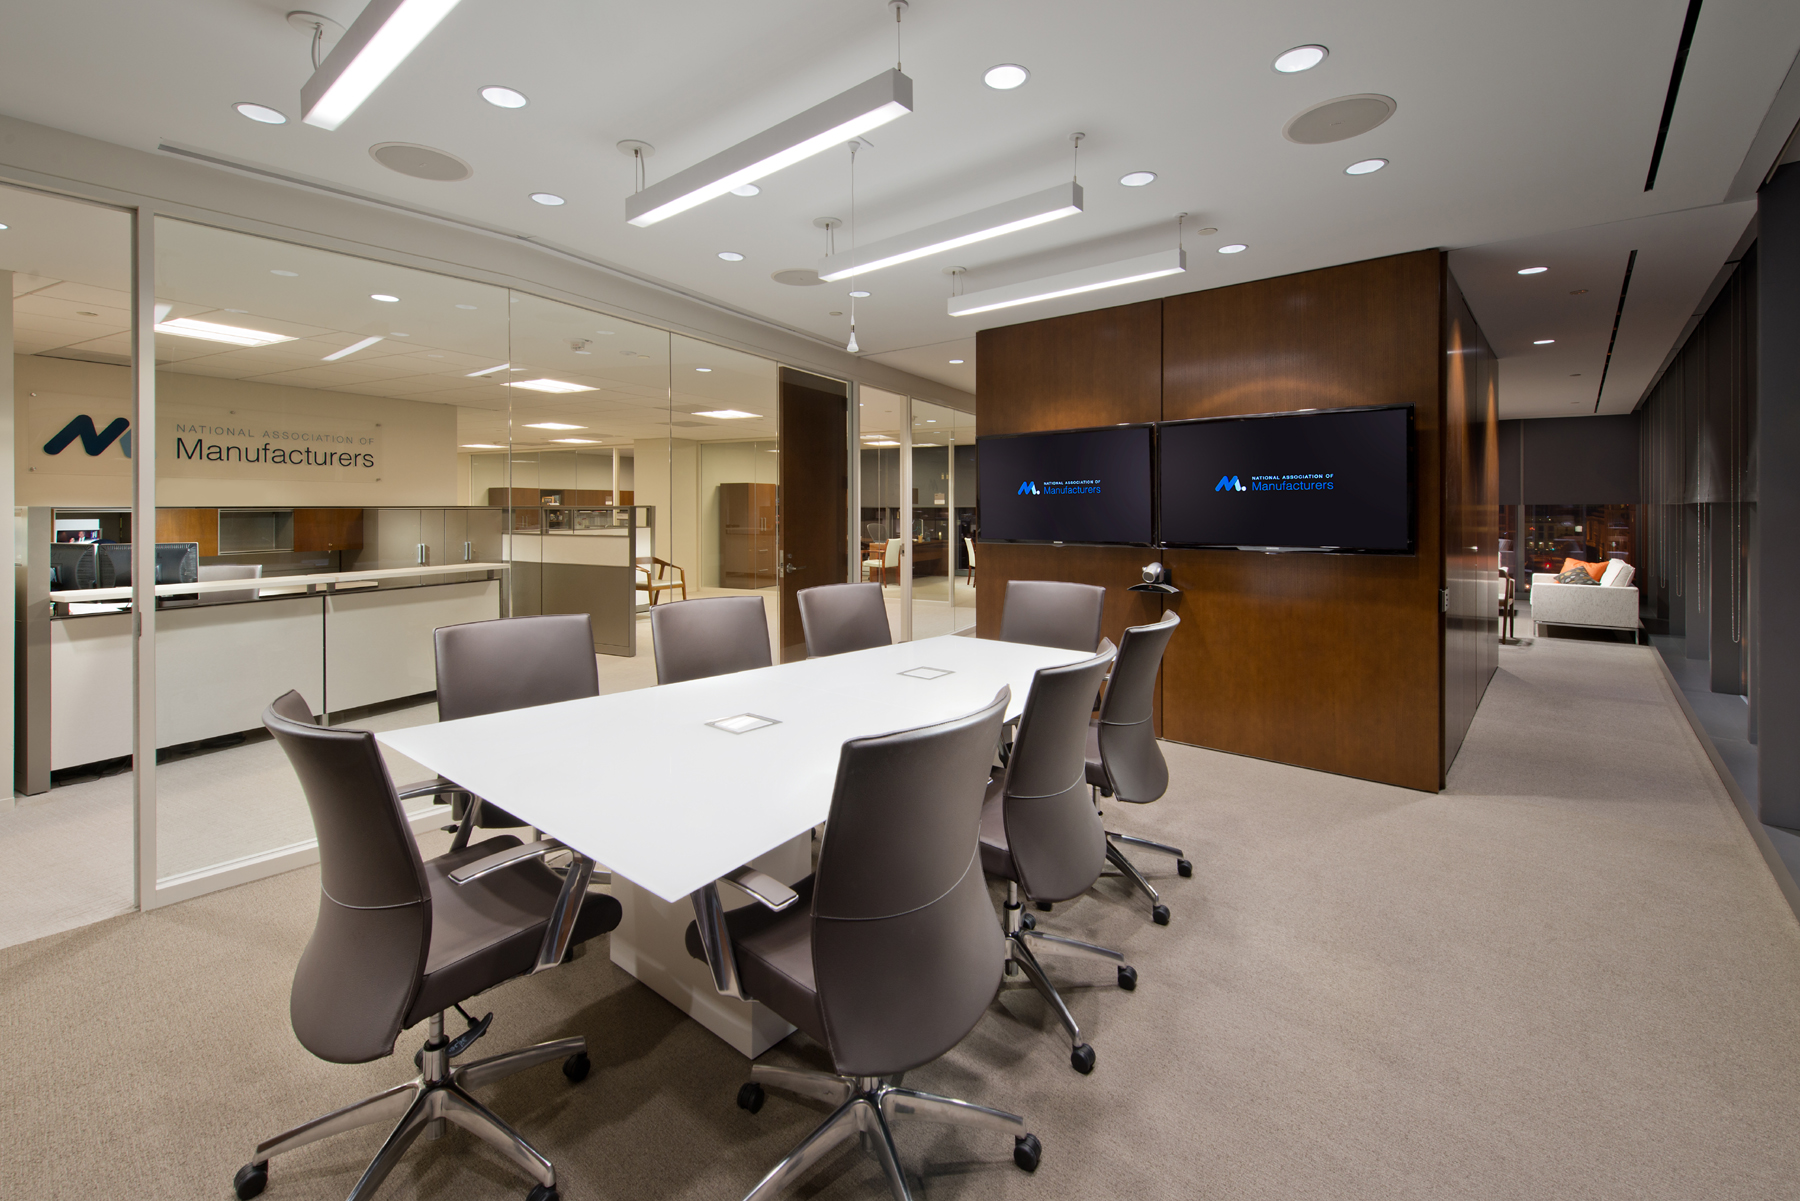 National Association of Manufacturers - Conference Room